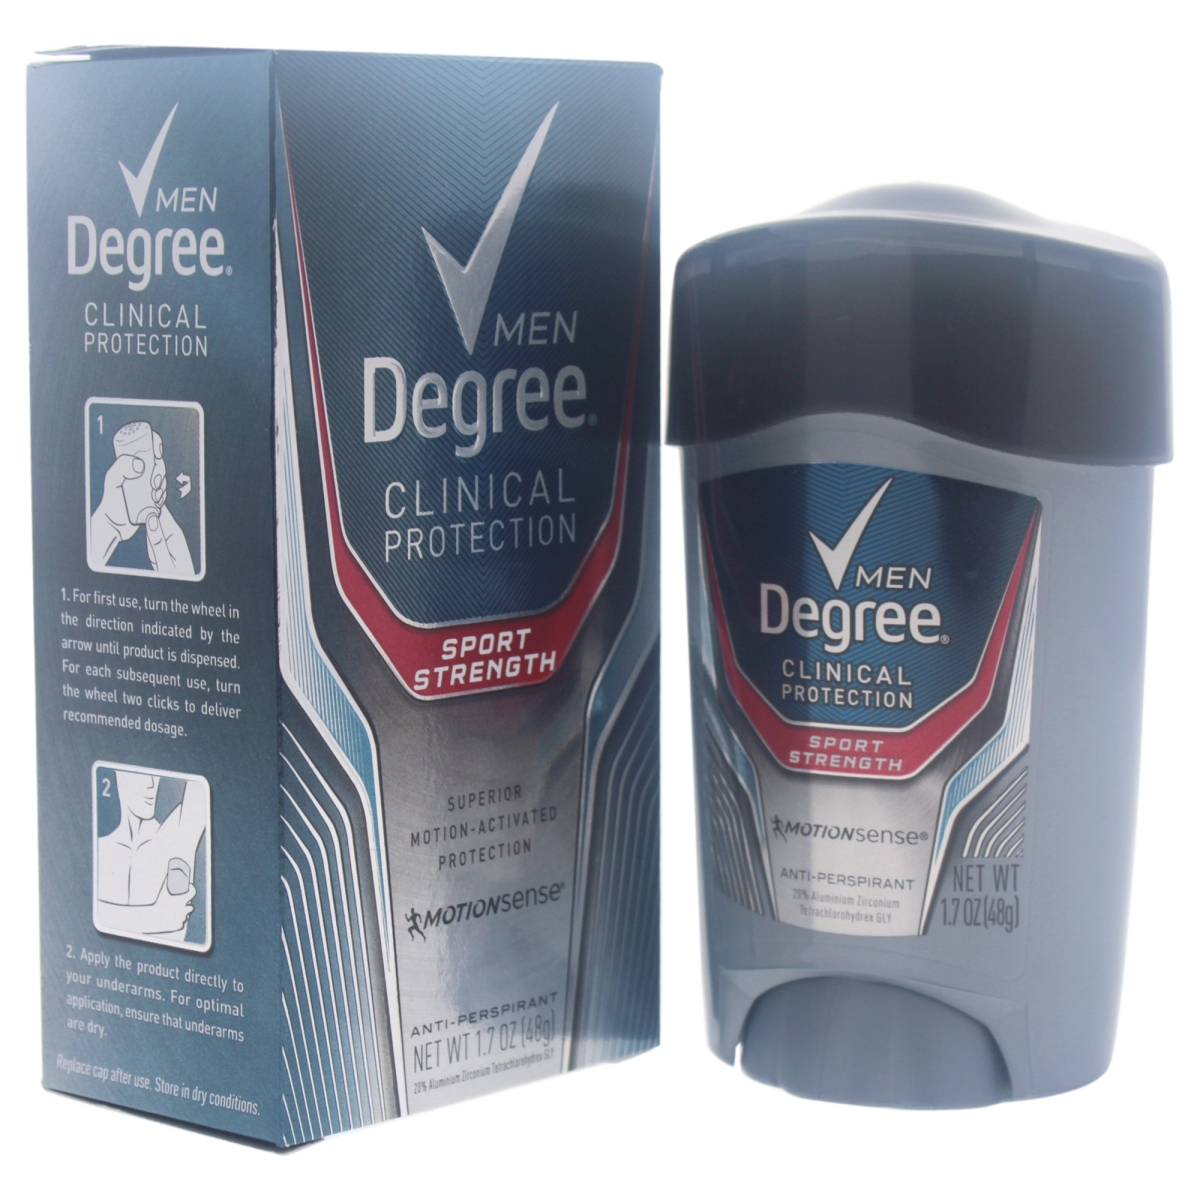 M-bb-2987 Clinical Protection Sport Strength Anti-perspirant Deodorant Stick For Men - 1.7 Oz